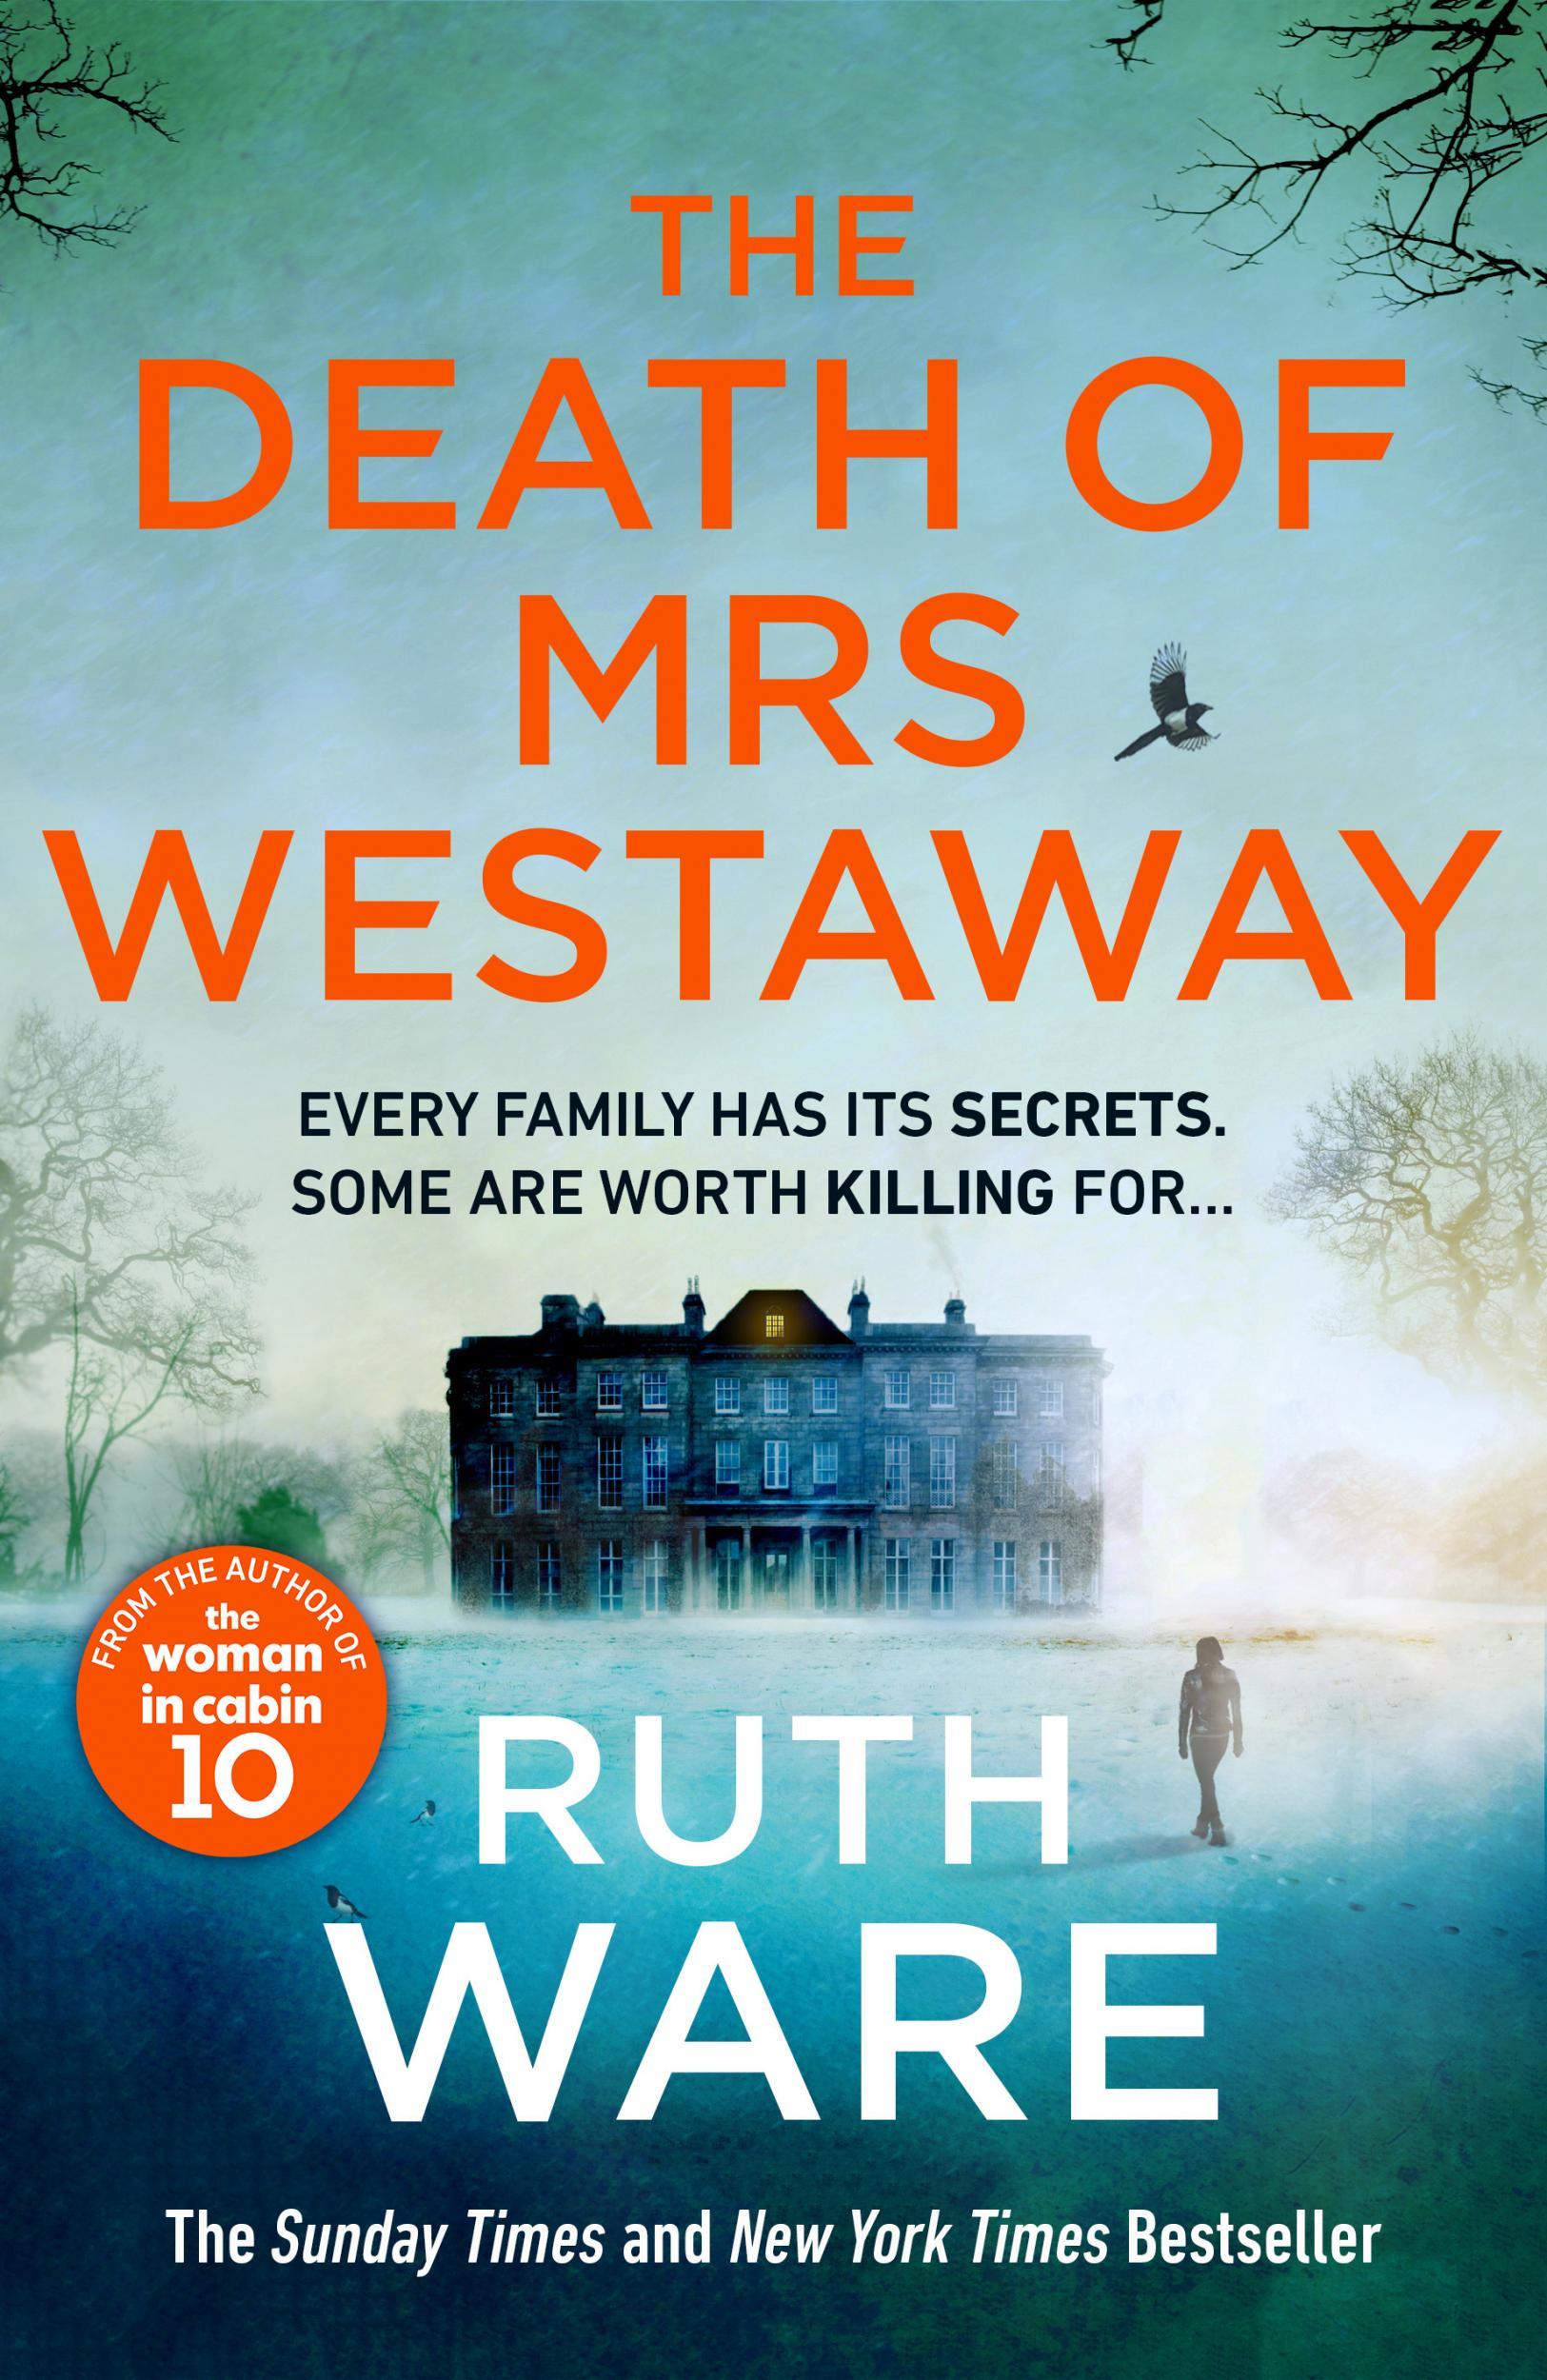 summary of the death of mrs westaway